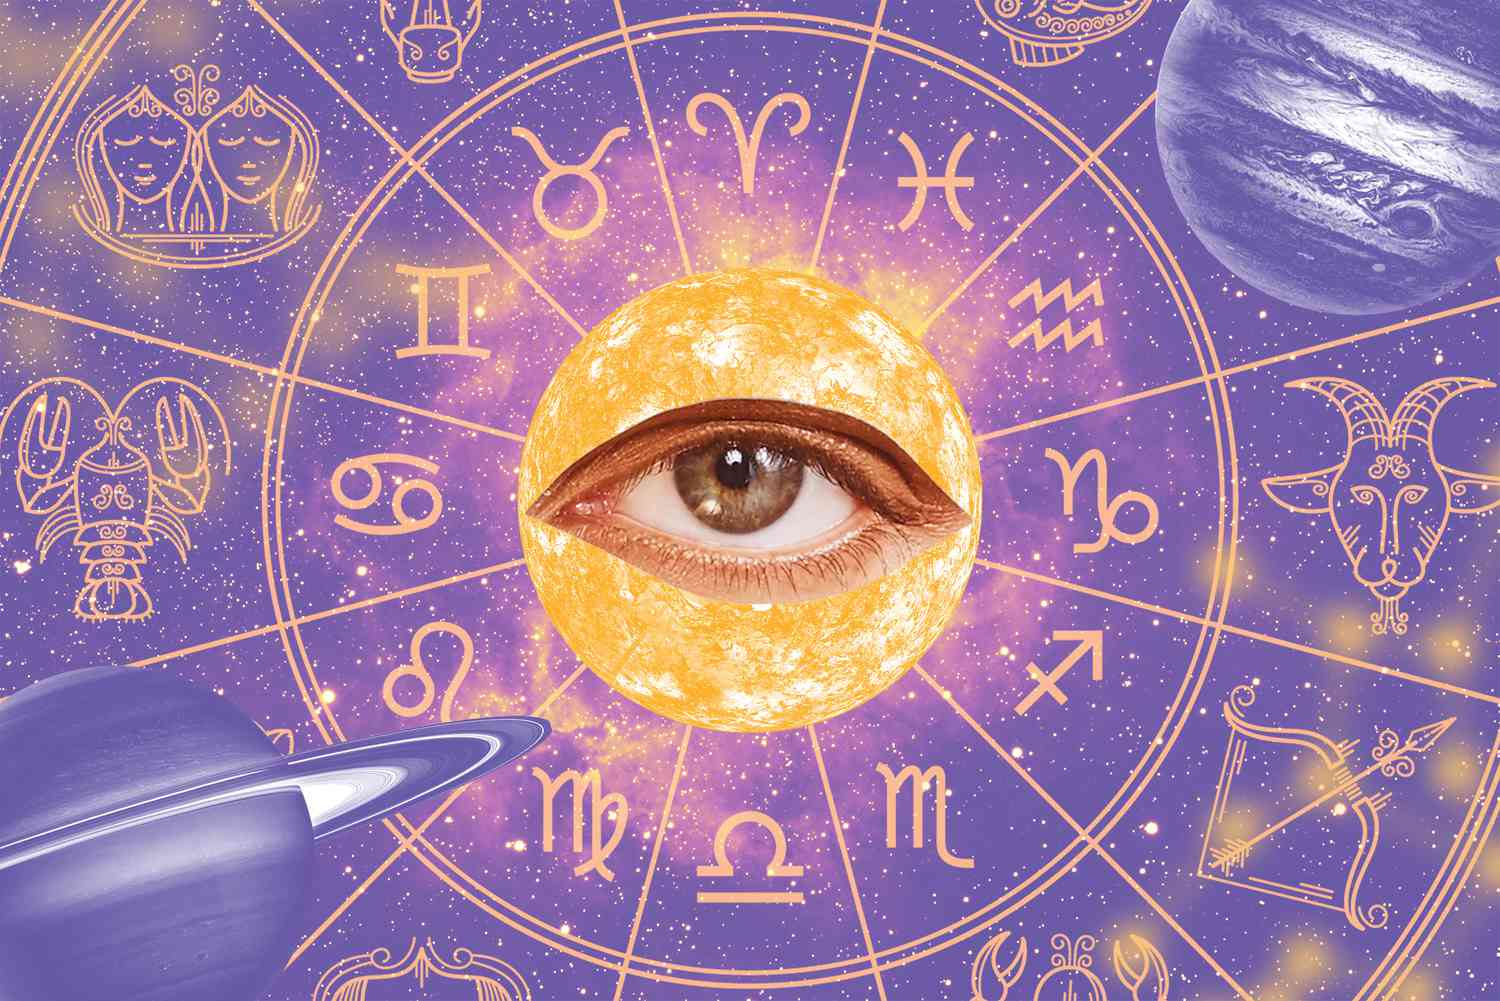 How The Zodiac Signs Relate To Astrology